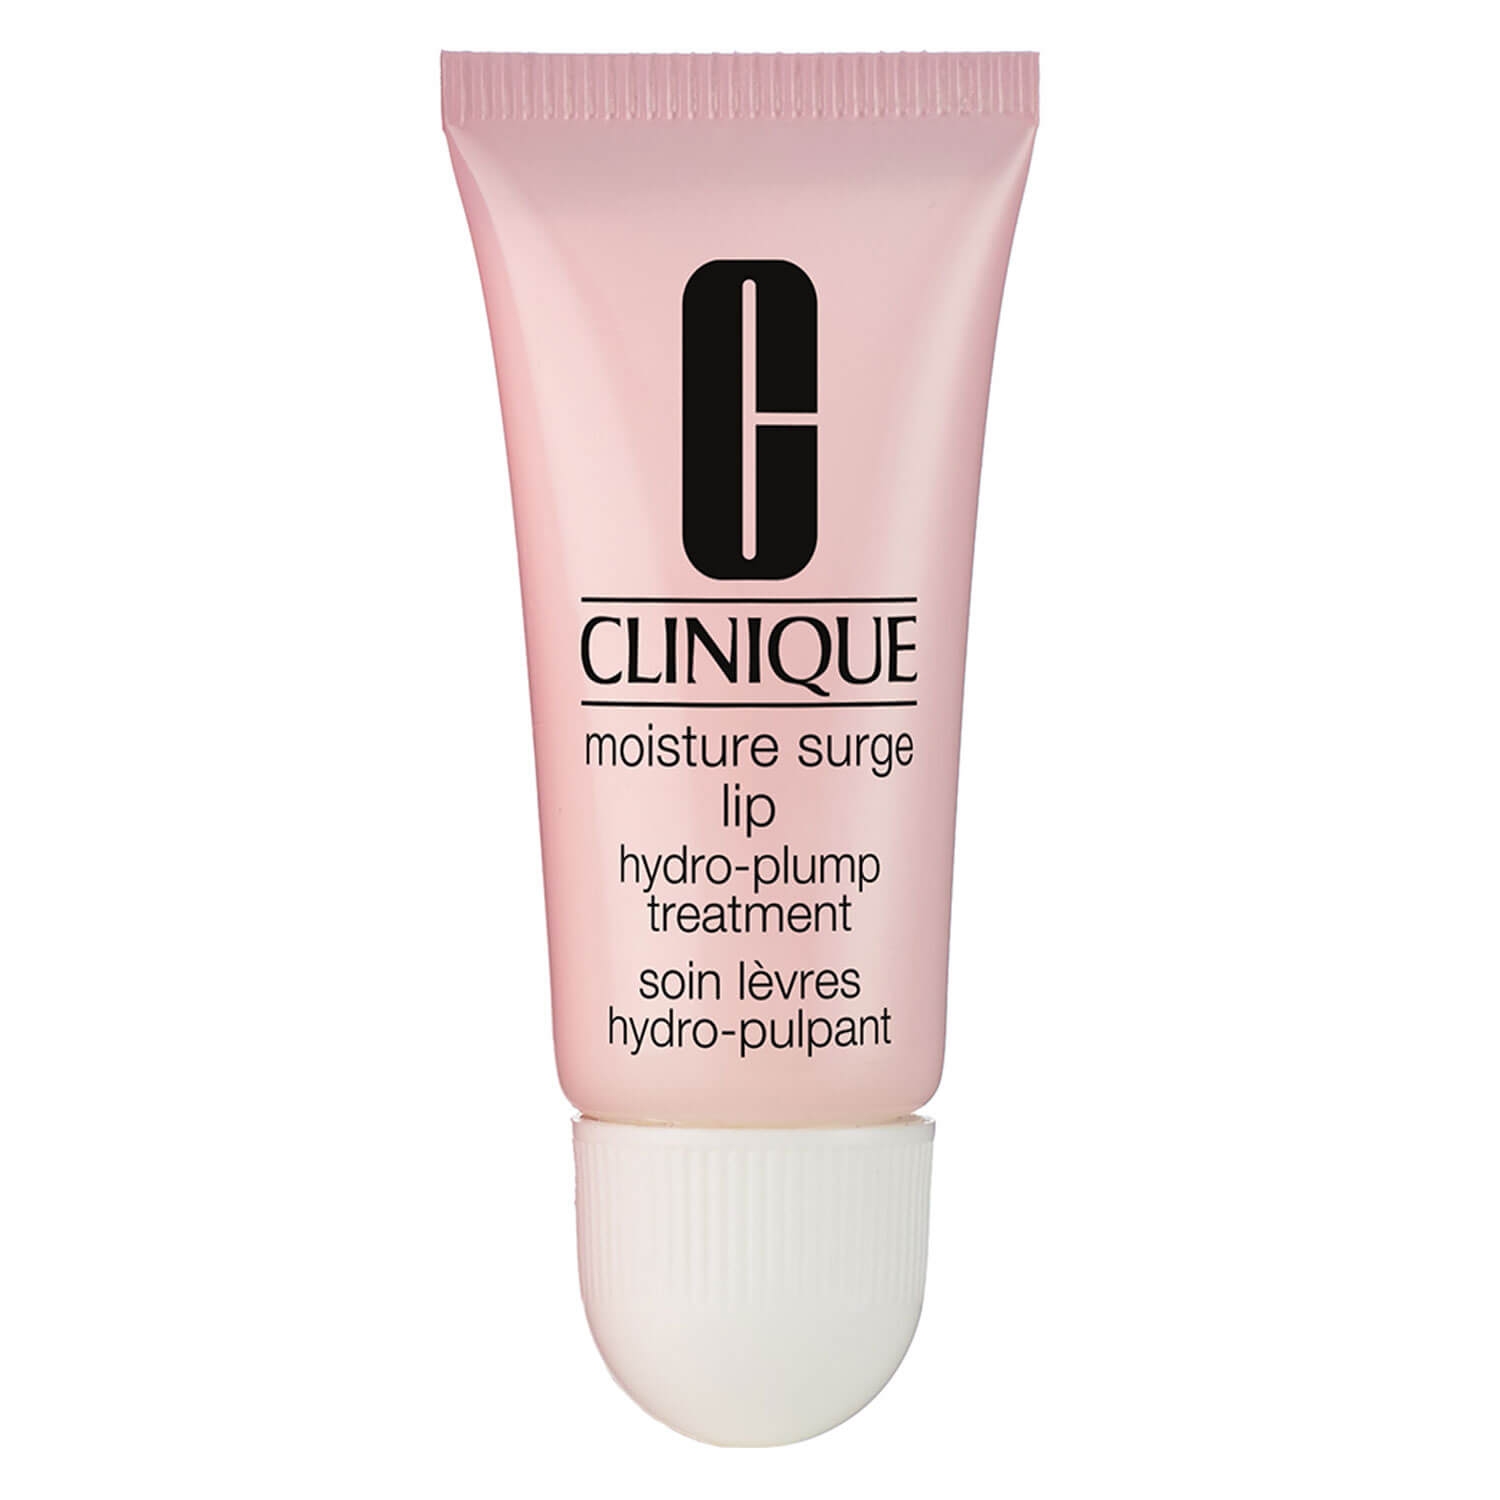 Product image from Clinique Lips - Moisture Surge Hydro-Plump Treatment